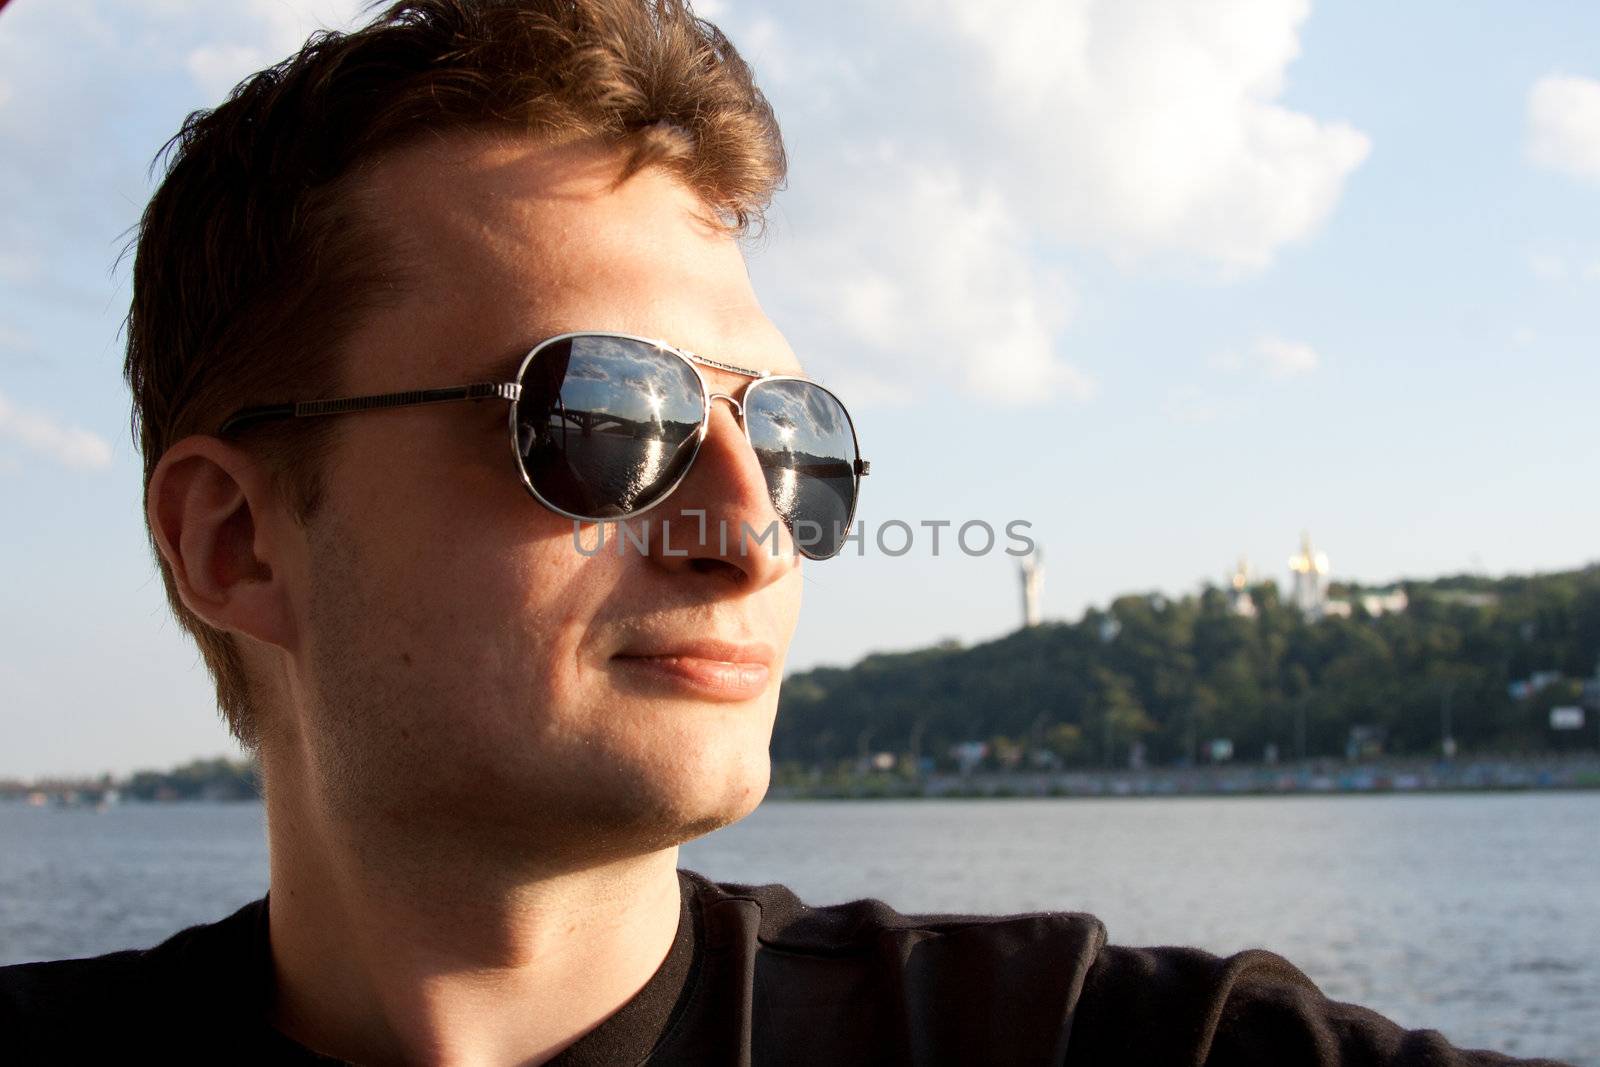 The guy in sunglasses against the background of sky and water outdoors shooting by victosha